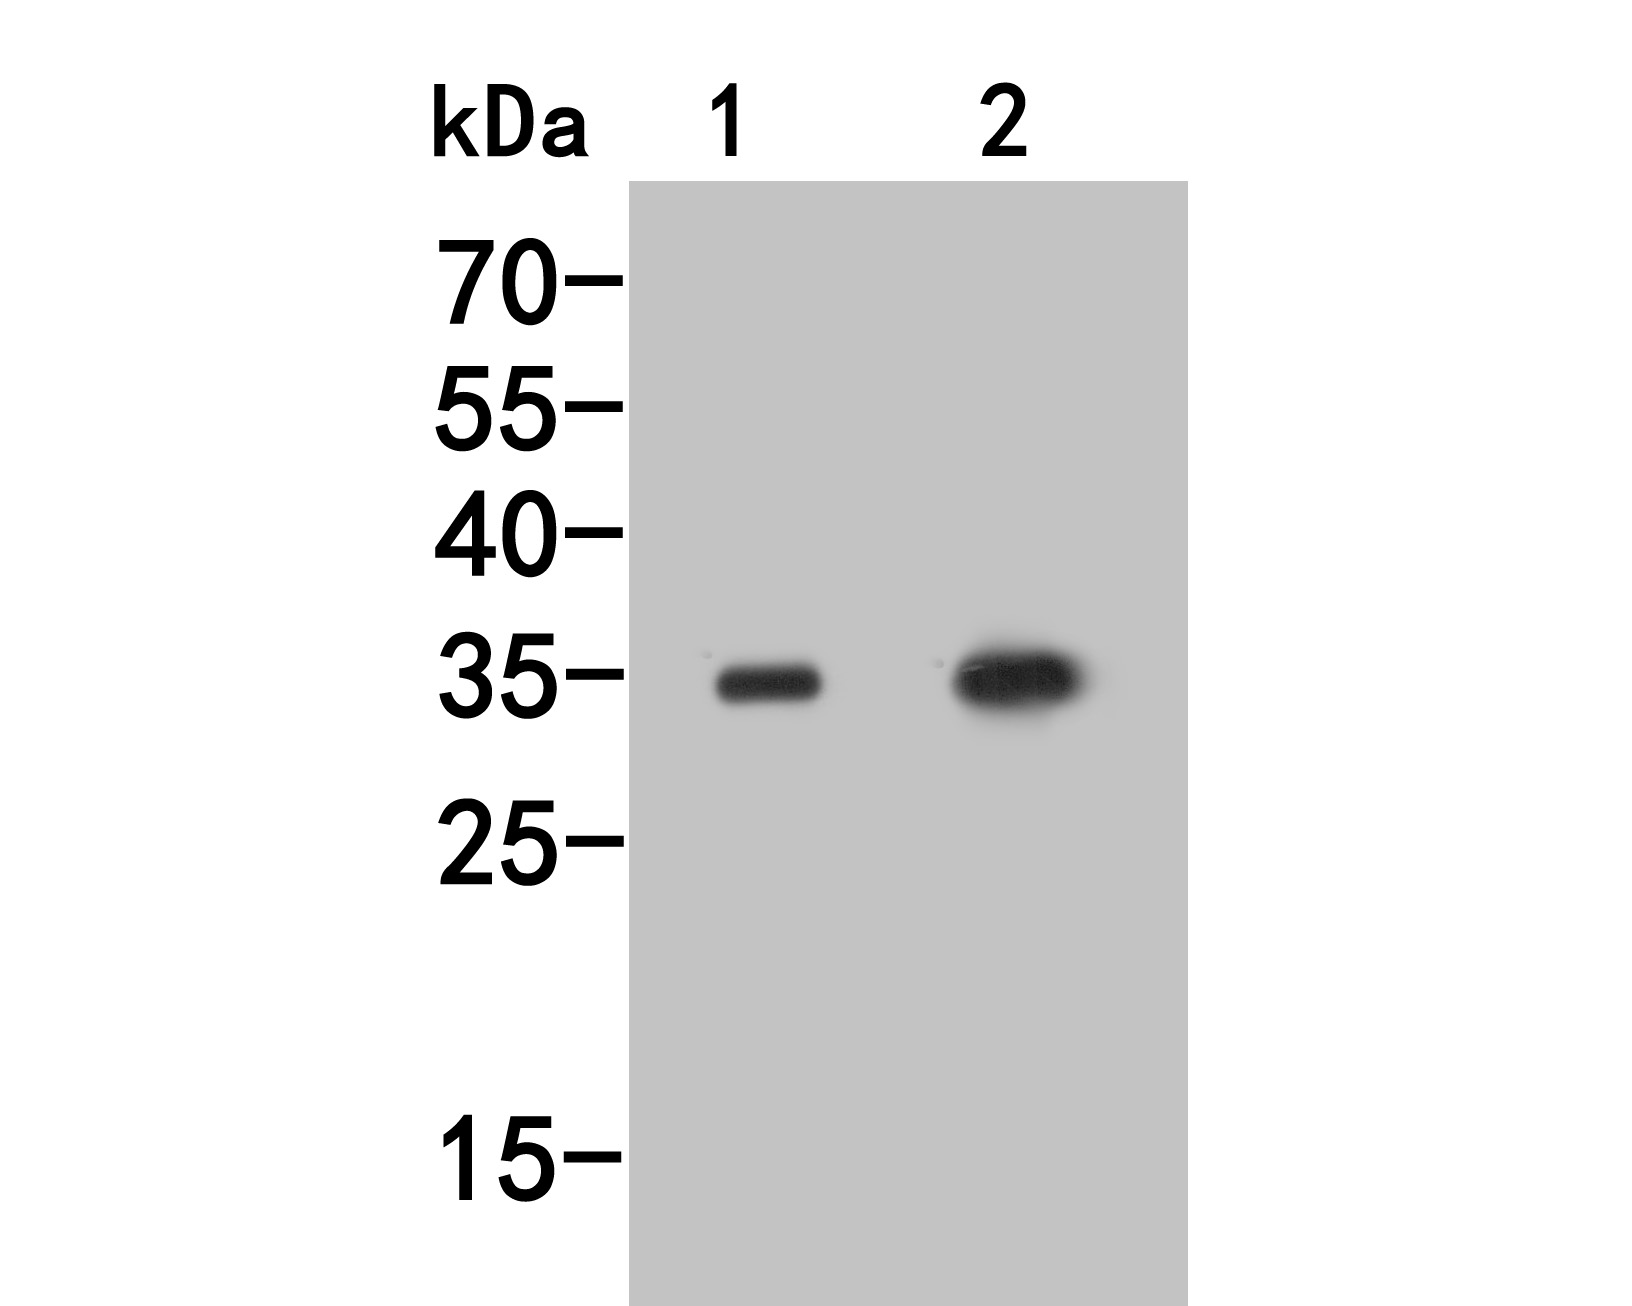 Western blot analysis of MEMO1 on different lysates. Proteins were transferred to a PVDF membrane and blocked with 5% BSA in PBS for 1 hour at room temperature. The primary antibody (HA500024, 1/1000) was used in 5% BSA at room temperature for 2 hours. Goat Anti-Rabbit IgG - HRP Secondary Antibody (HA1001) at 1:5,000 dilution was used for 1 hour at room temperature.<br />
Positive control: <br />
Lane 1: Mouse lung tissue lysate<br />
Lane 2: Mouse colon tissue lysate